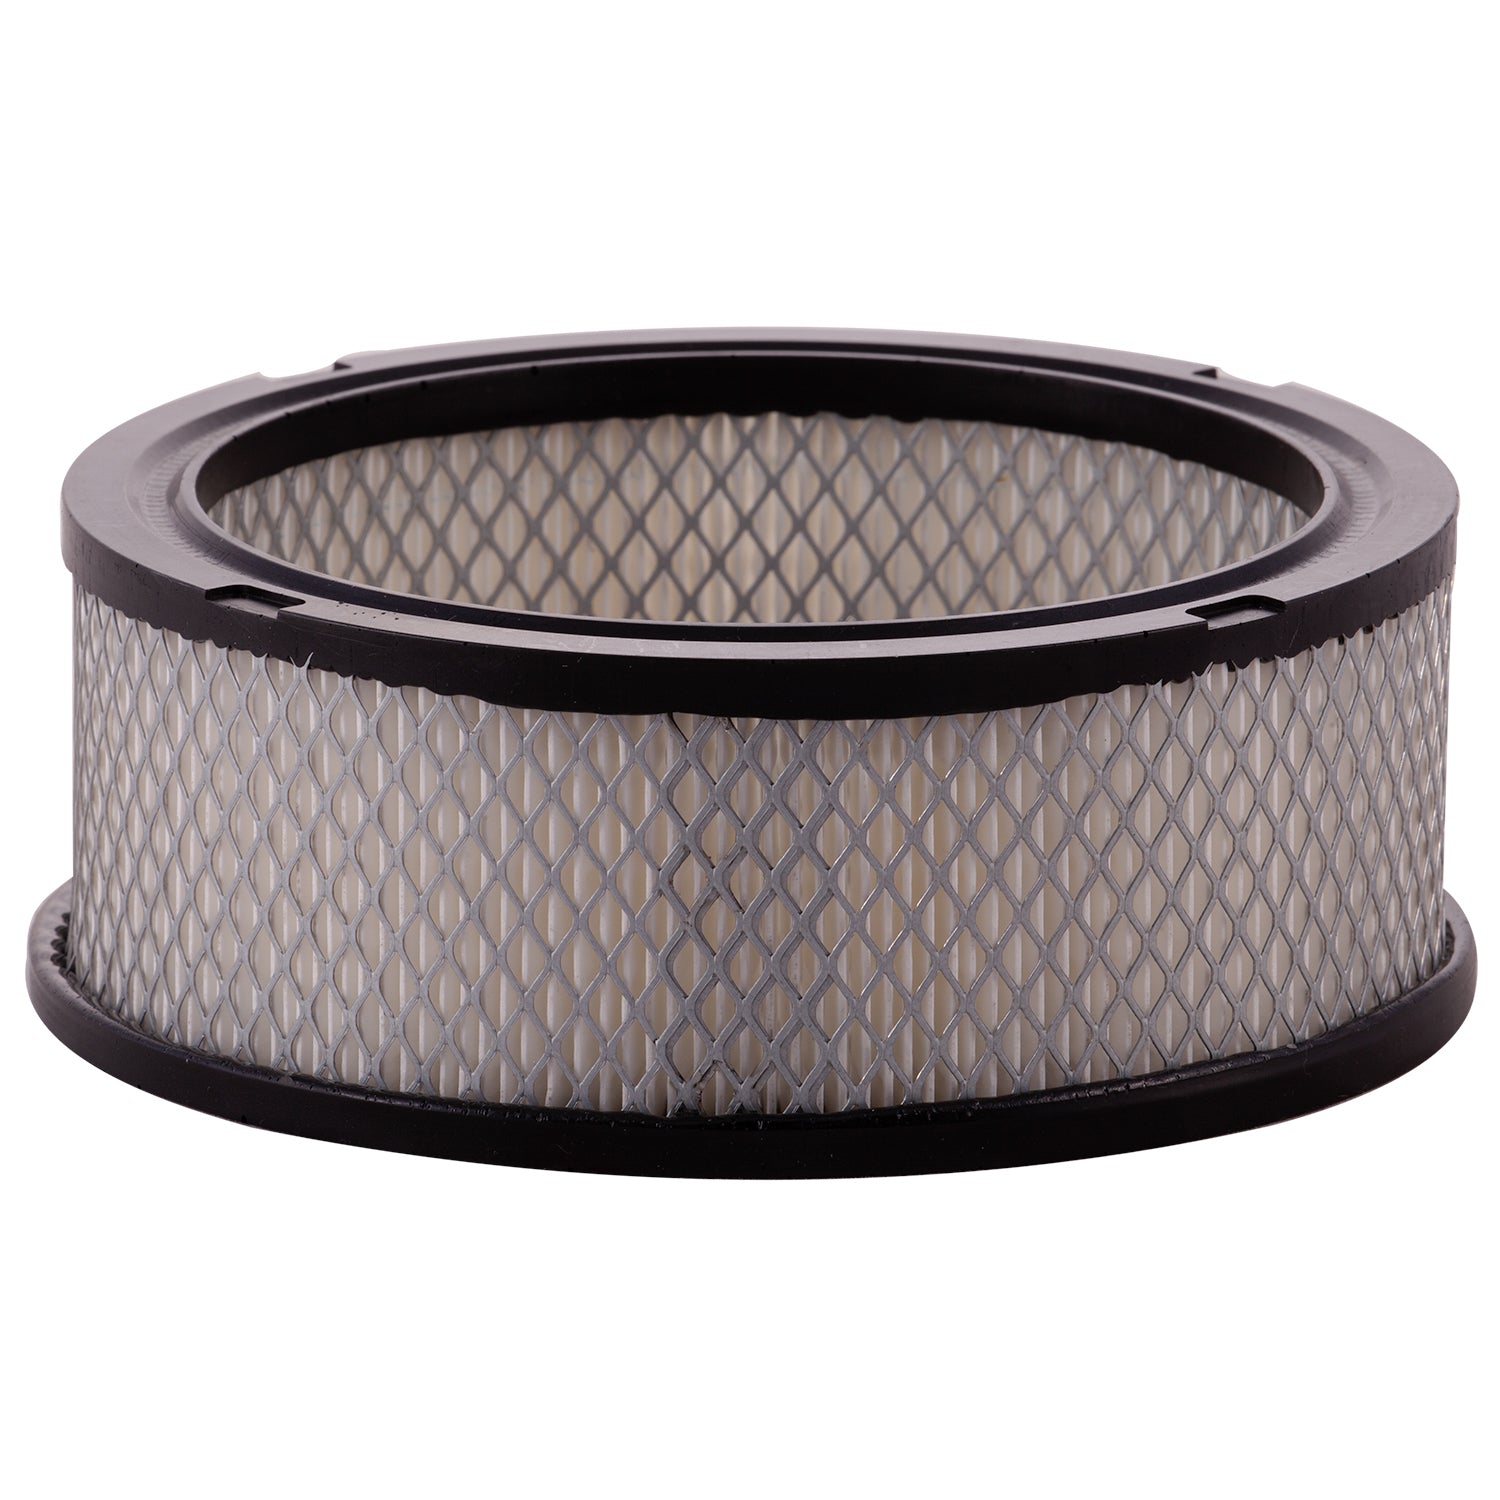 1970 Plymouth Fury III Air Filter  PA84